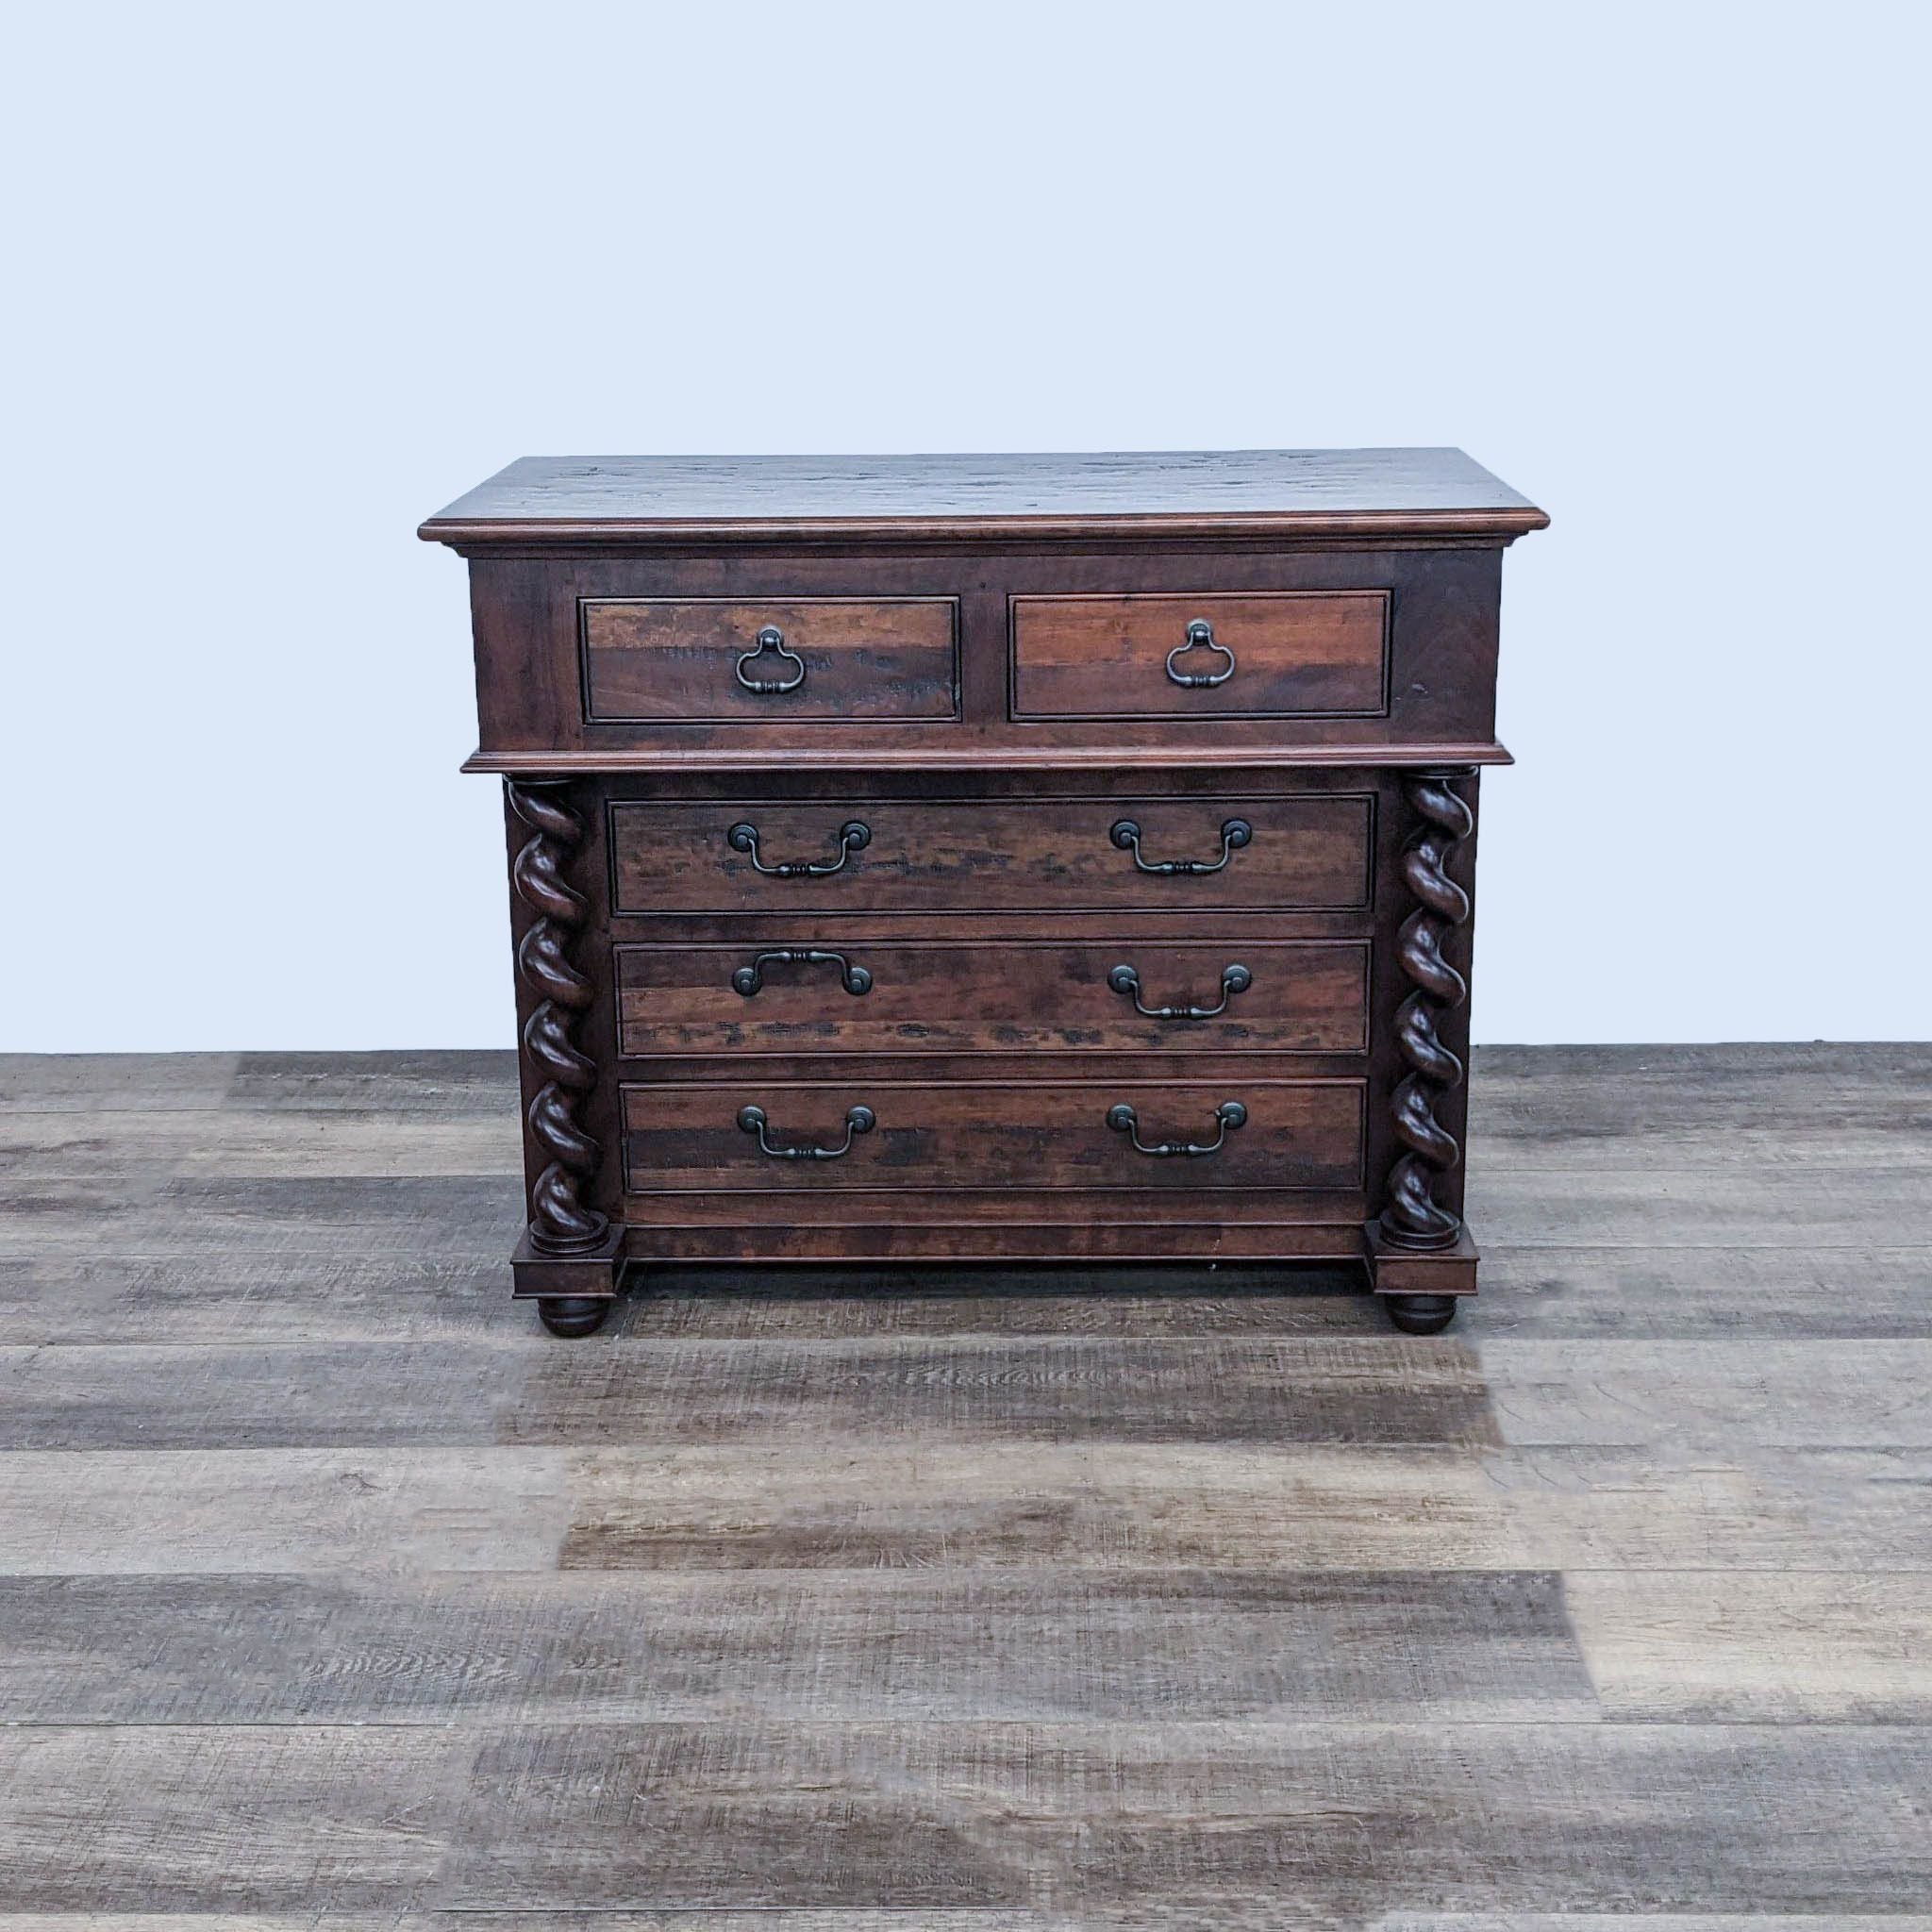 Alt text 1: Traditional Reperch dark wood dresser with twisted detailing and two small top drawers above three larger ones.